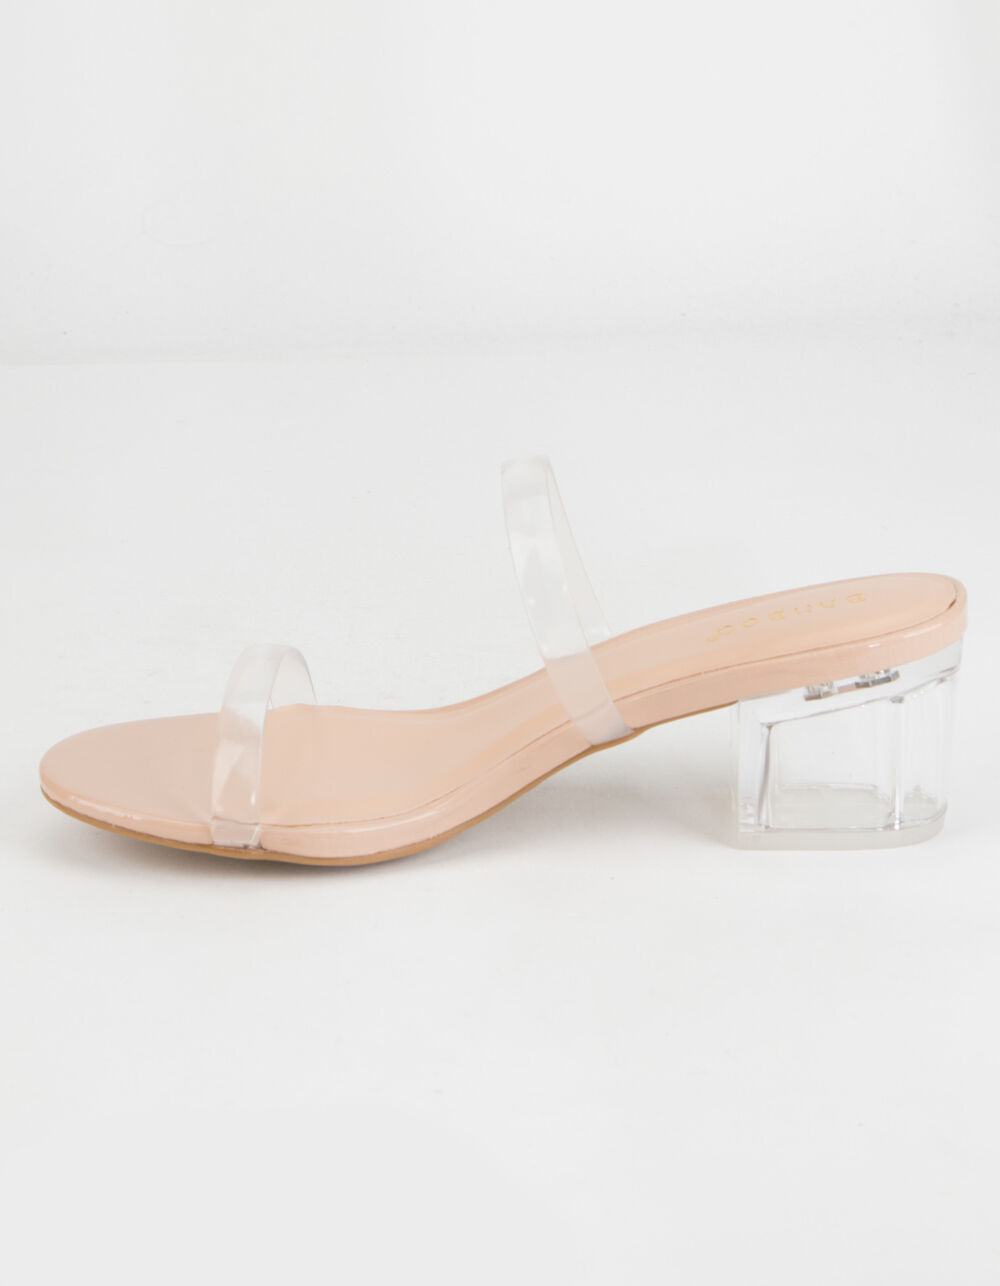 BAMBOO Lucite Double Strap Womens Heels - NUDE | Tillys